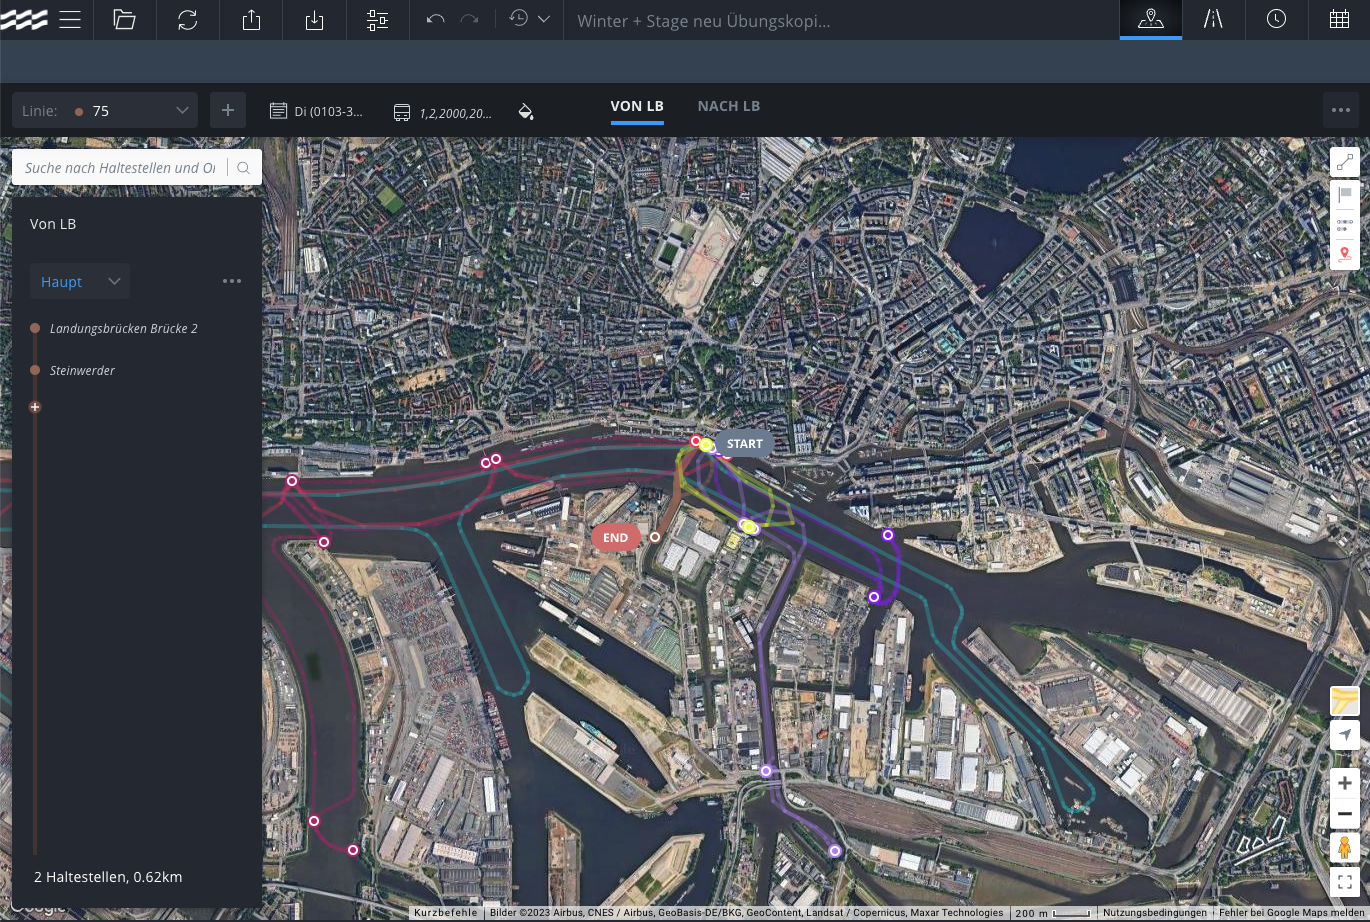 HADAG uses Optibus Planning to digitally recreate their entire transport network and discover ways to optimize route efficiency. Here, you can see several of HADAG’s ferry routes on the River Elbe just west of Hamburg’s city center. The